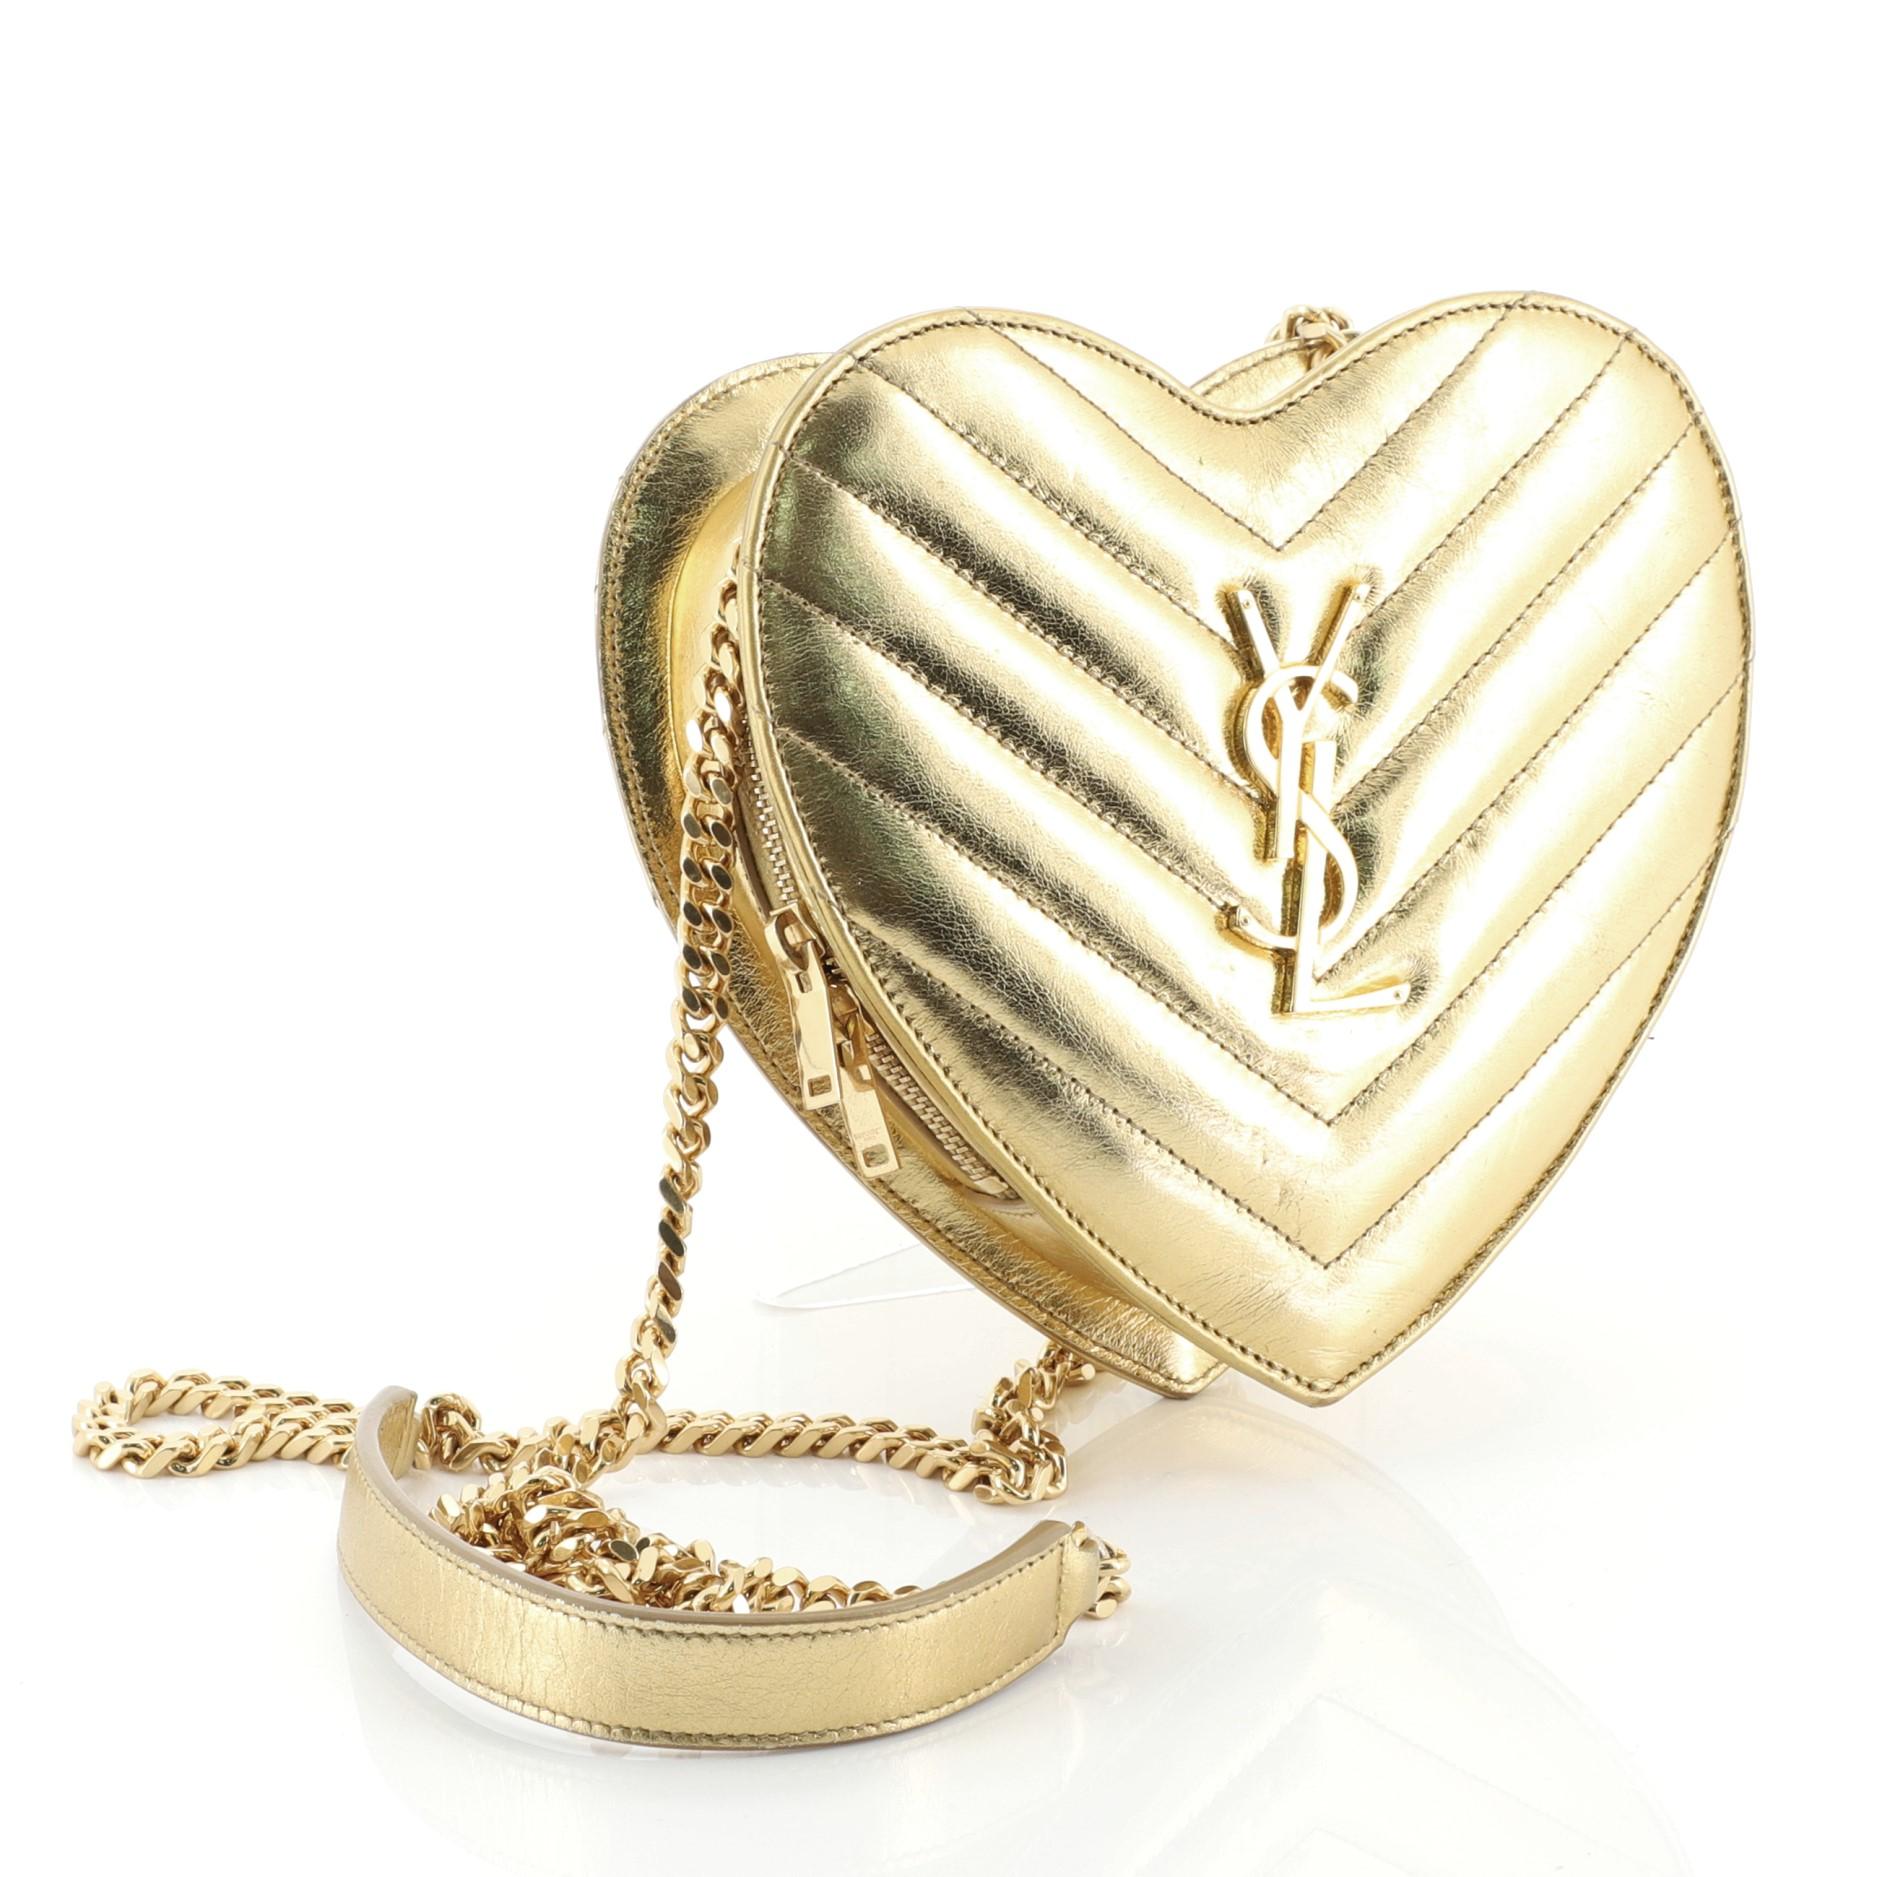 This Saint Laurent Love Heart Chain Bag Matelasse Chevron Leather Small, crafted from gold matelasse chevron leather, features chain link strap with leather shoulder pad, interlocking YSL logo and gold-tone hardware. Its zip closure opens to a black